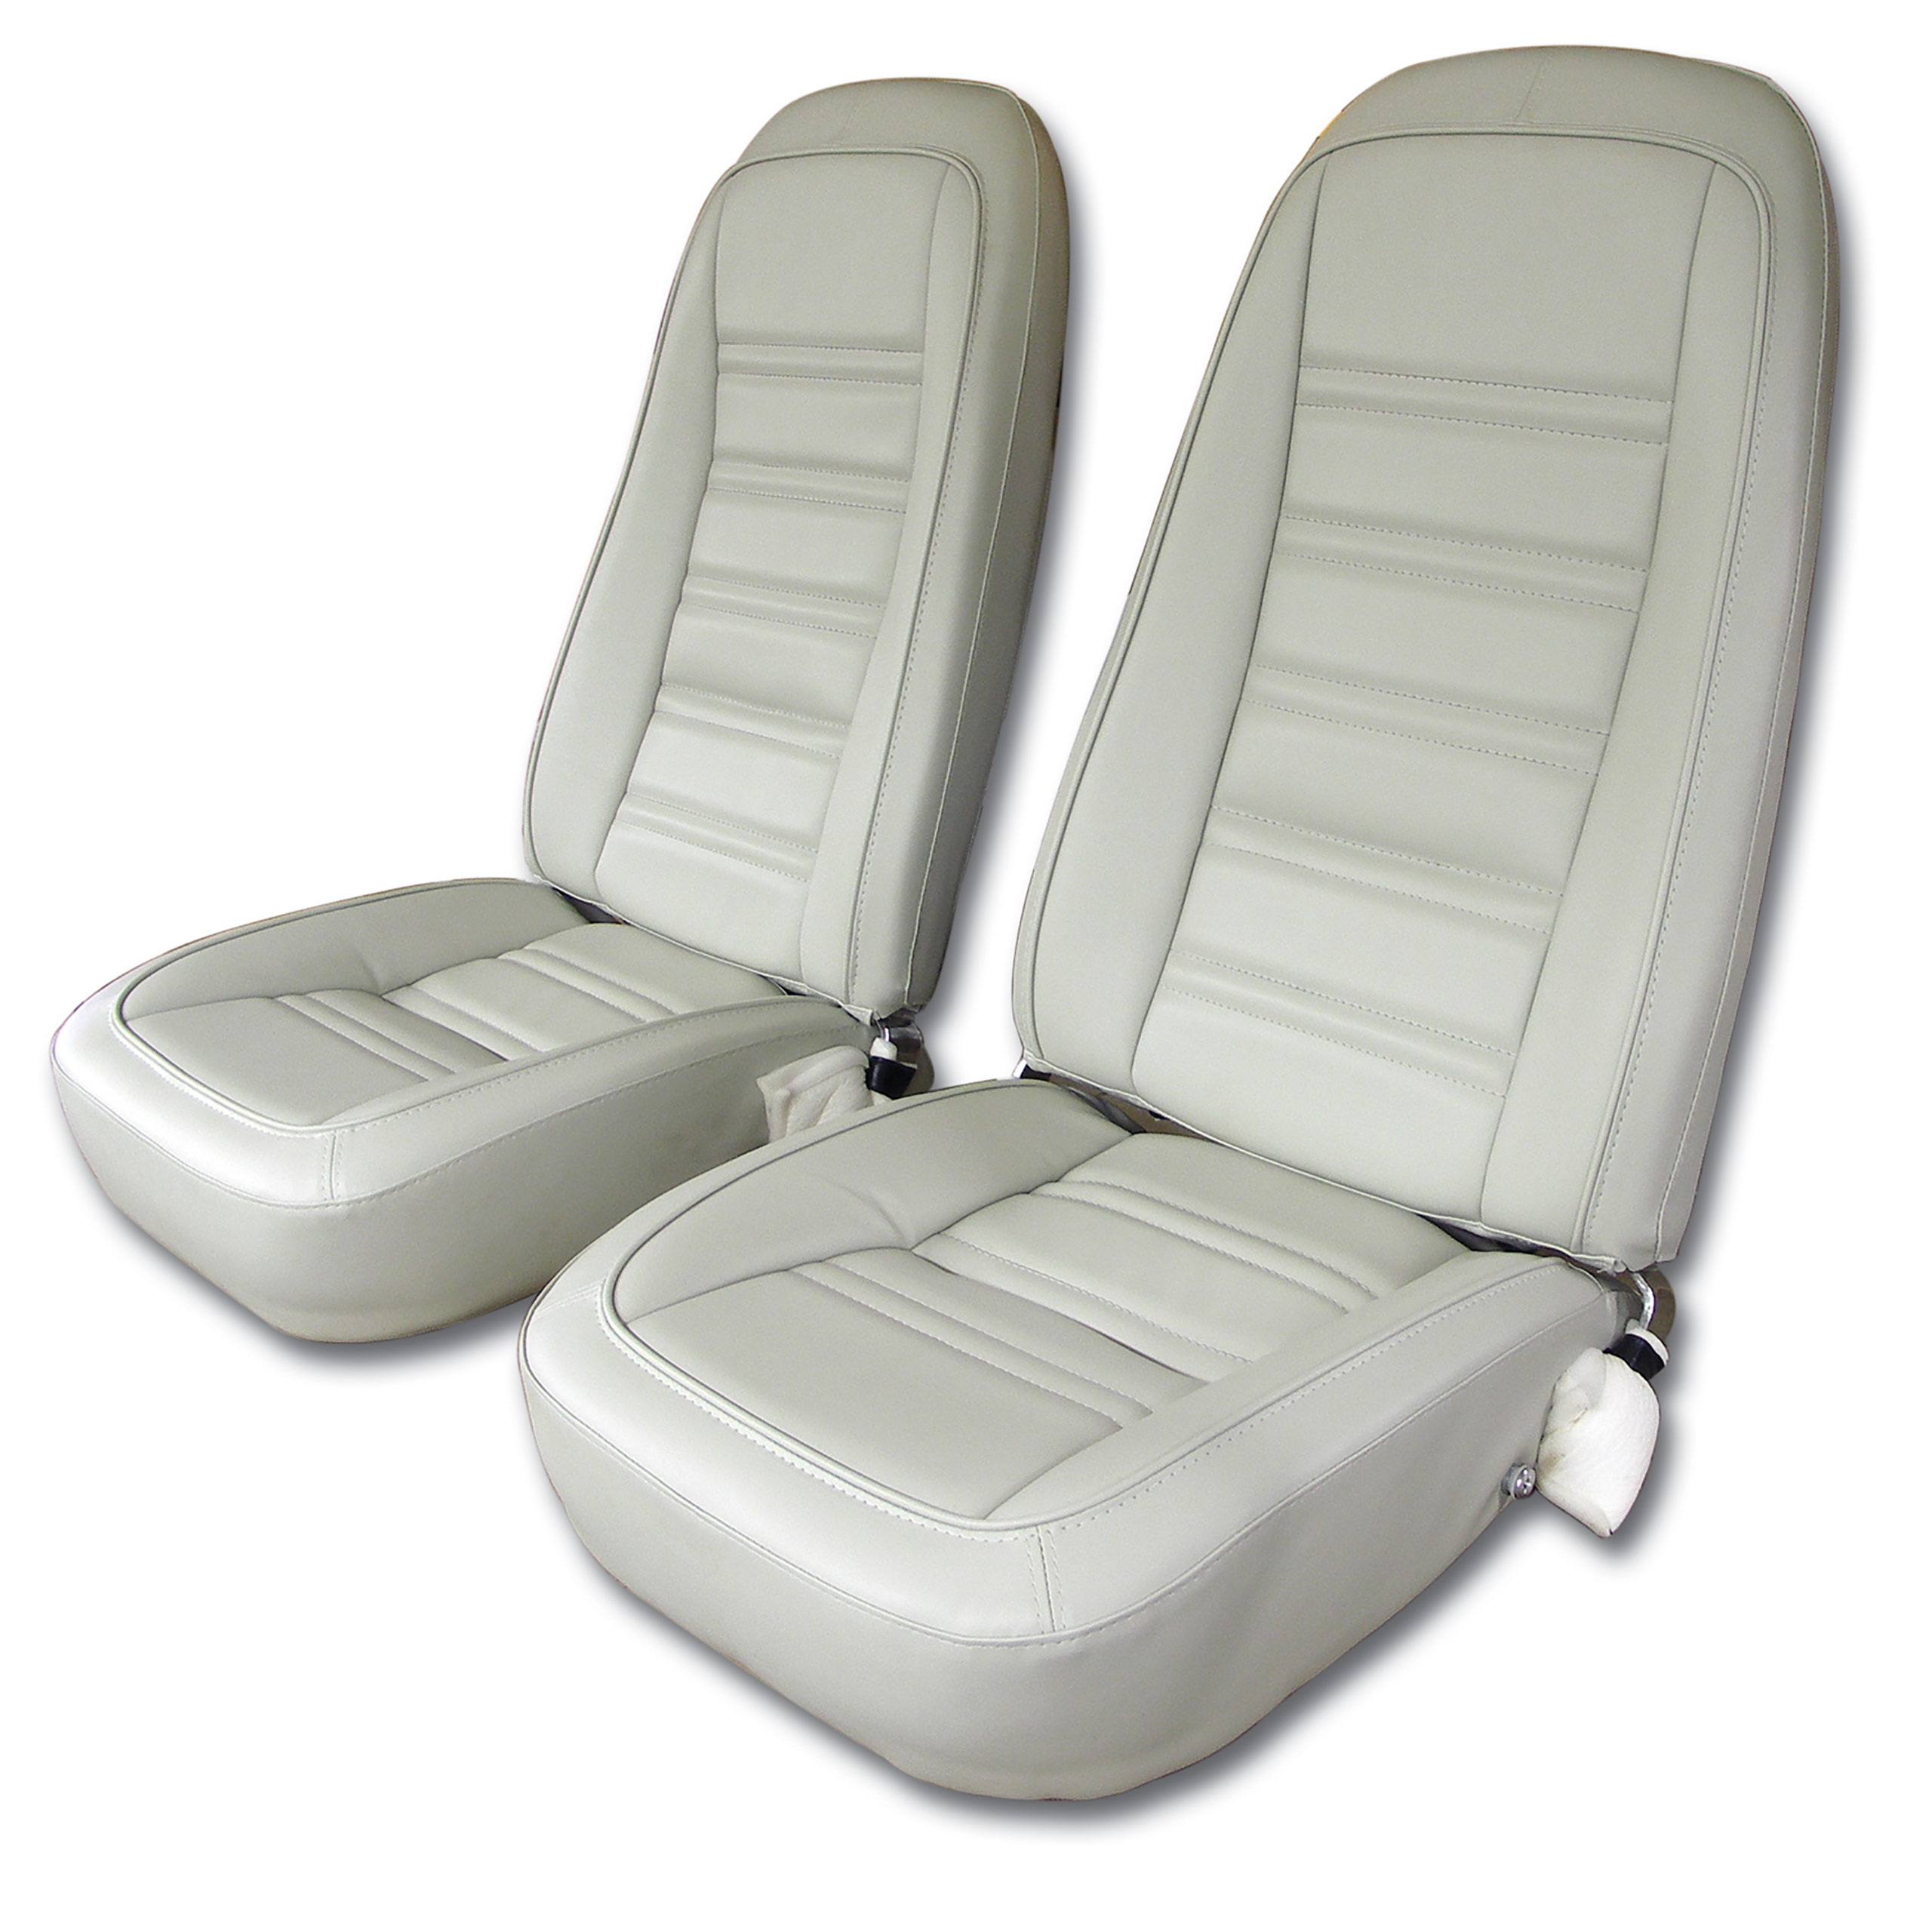 1978 Corvette C3 "Leather-Like" Vinyl Seat Covers- Oyster CA-421573 